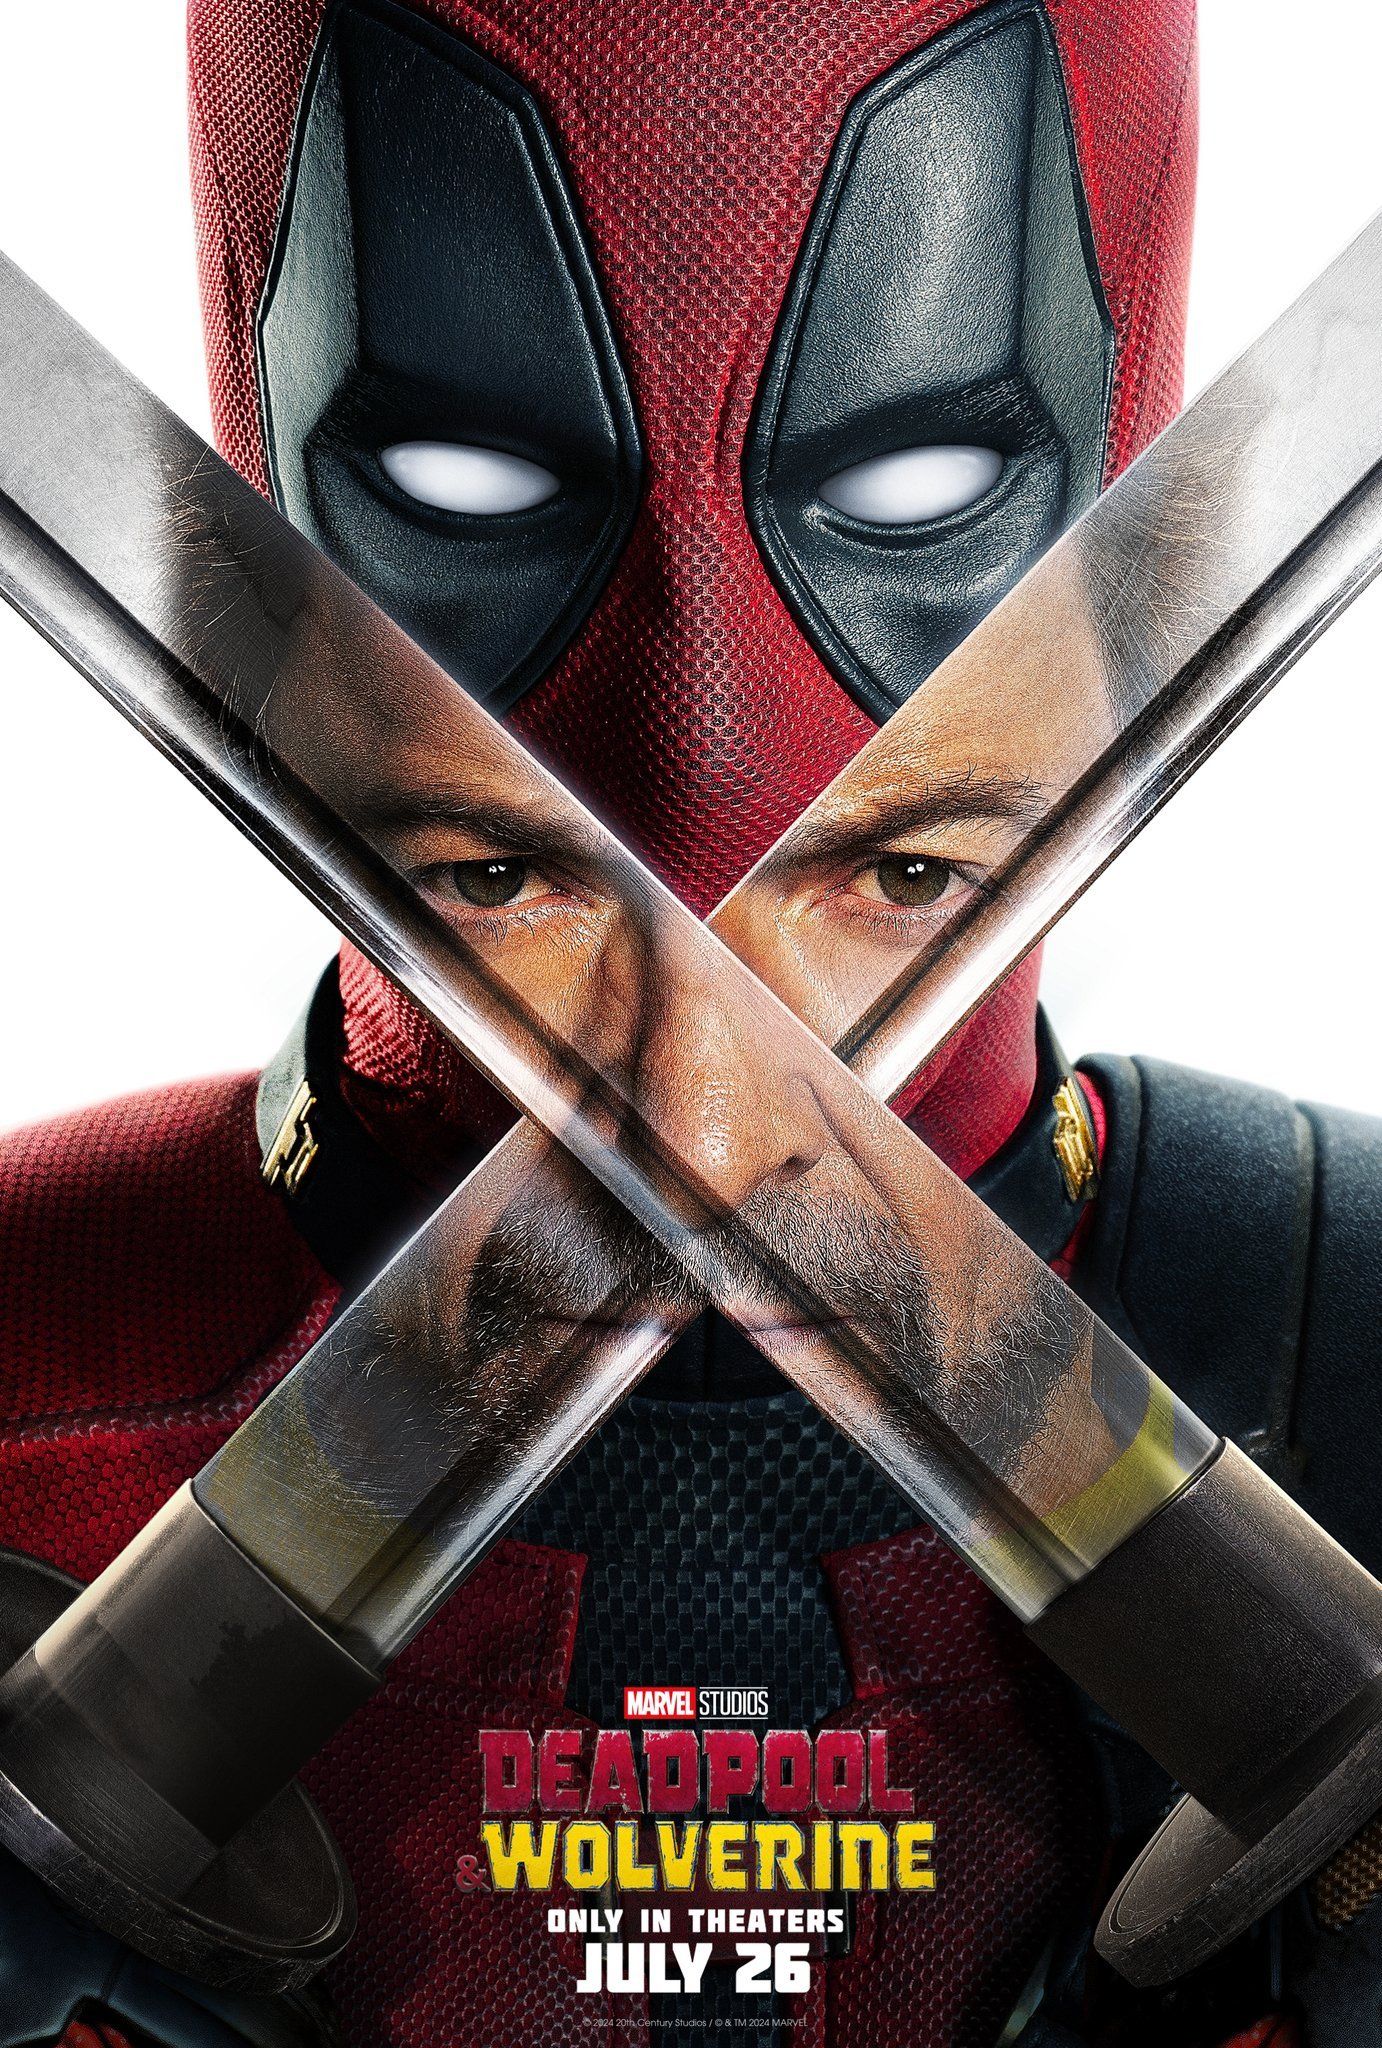 Deadpool & Wolverine Has "Universe-Sized" Stakes Says Marvel President